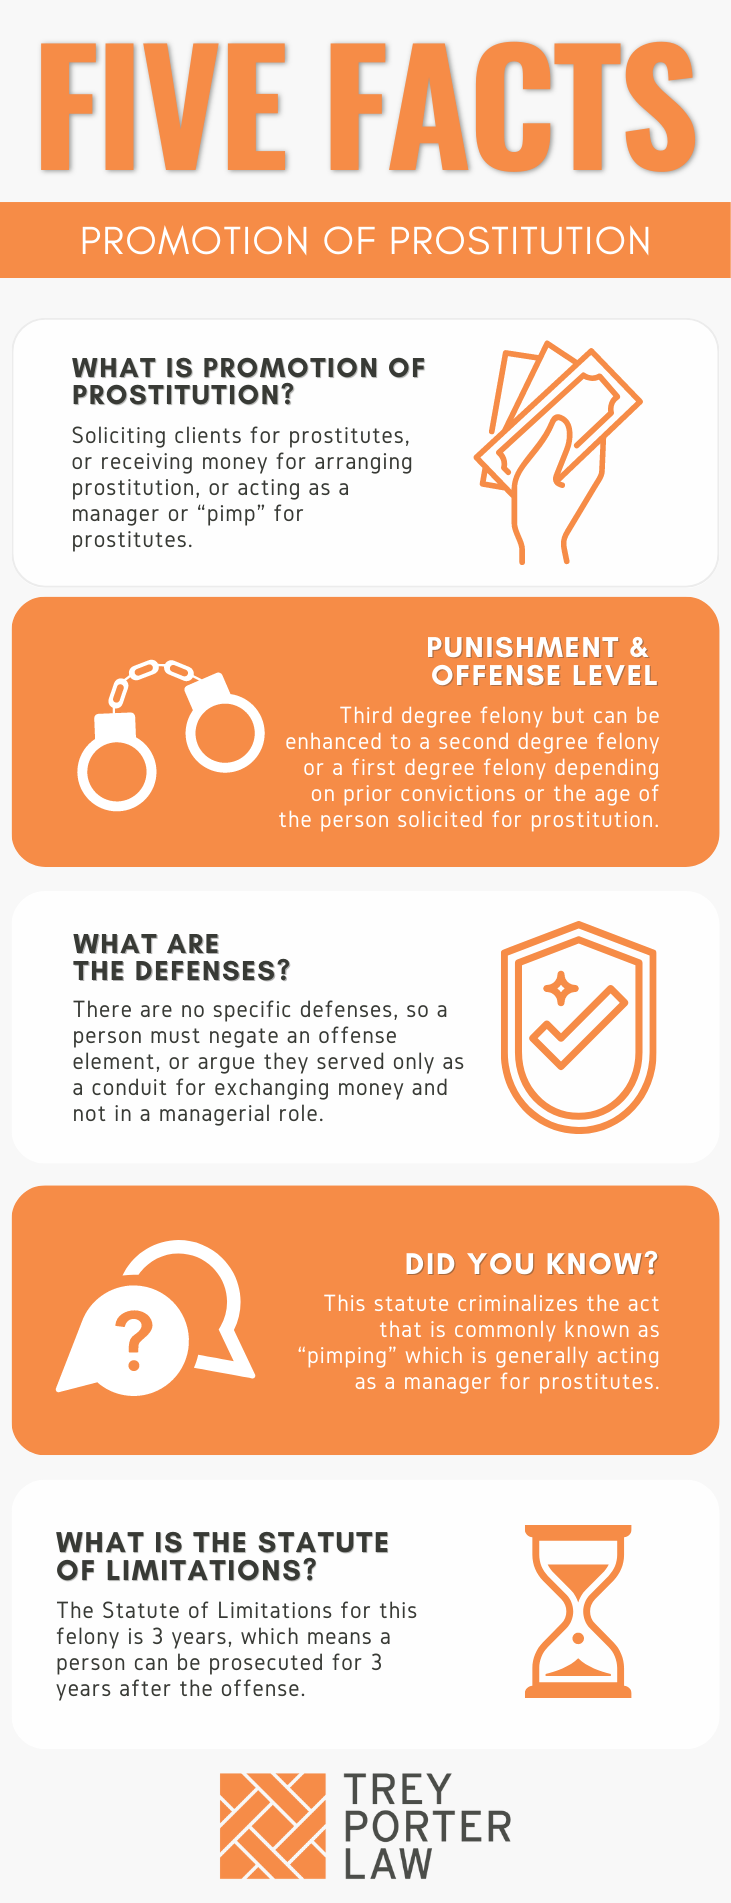 Texas Penal Code 43.03 - Promotion of Prostitution